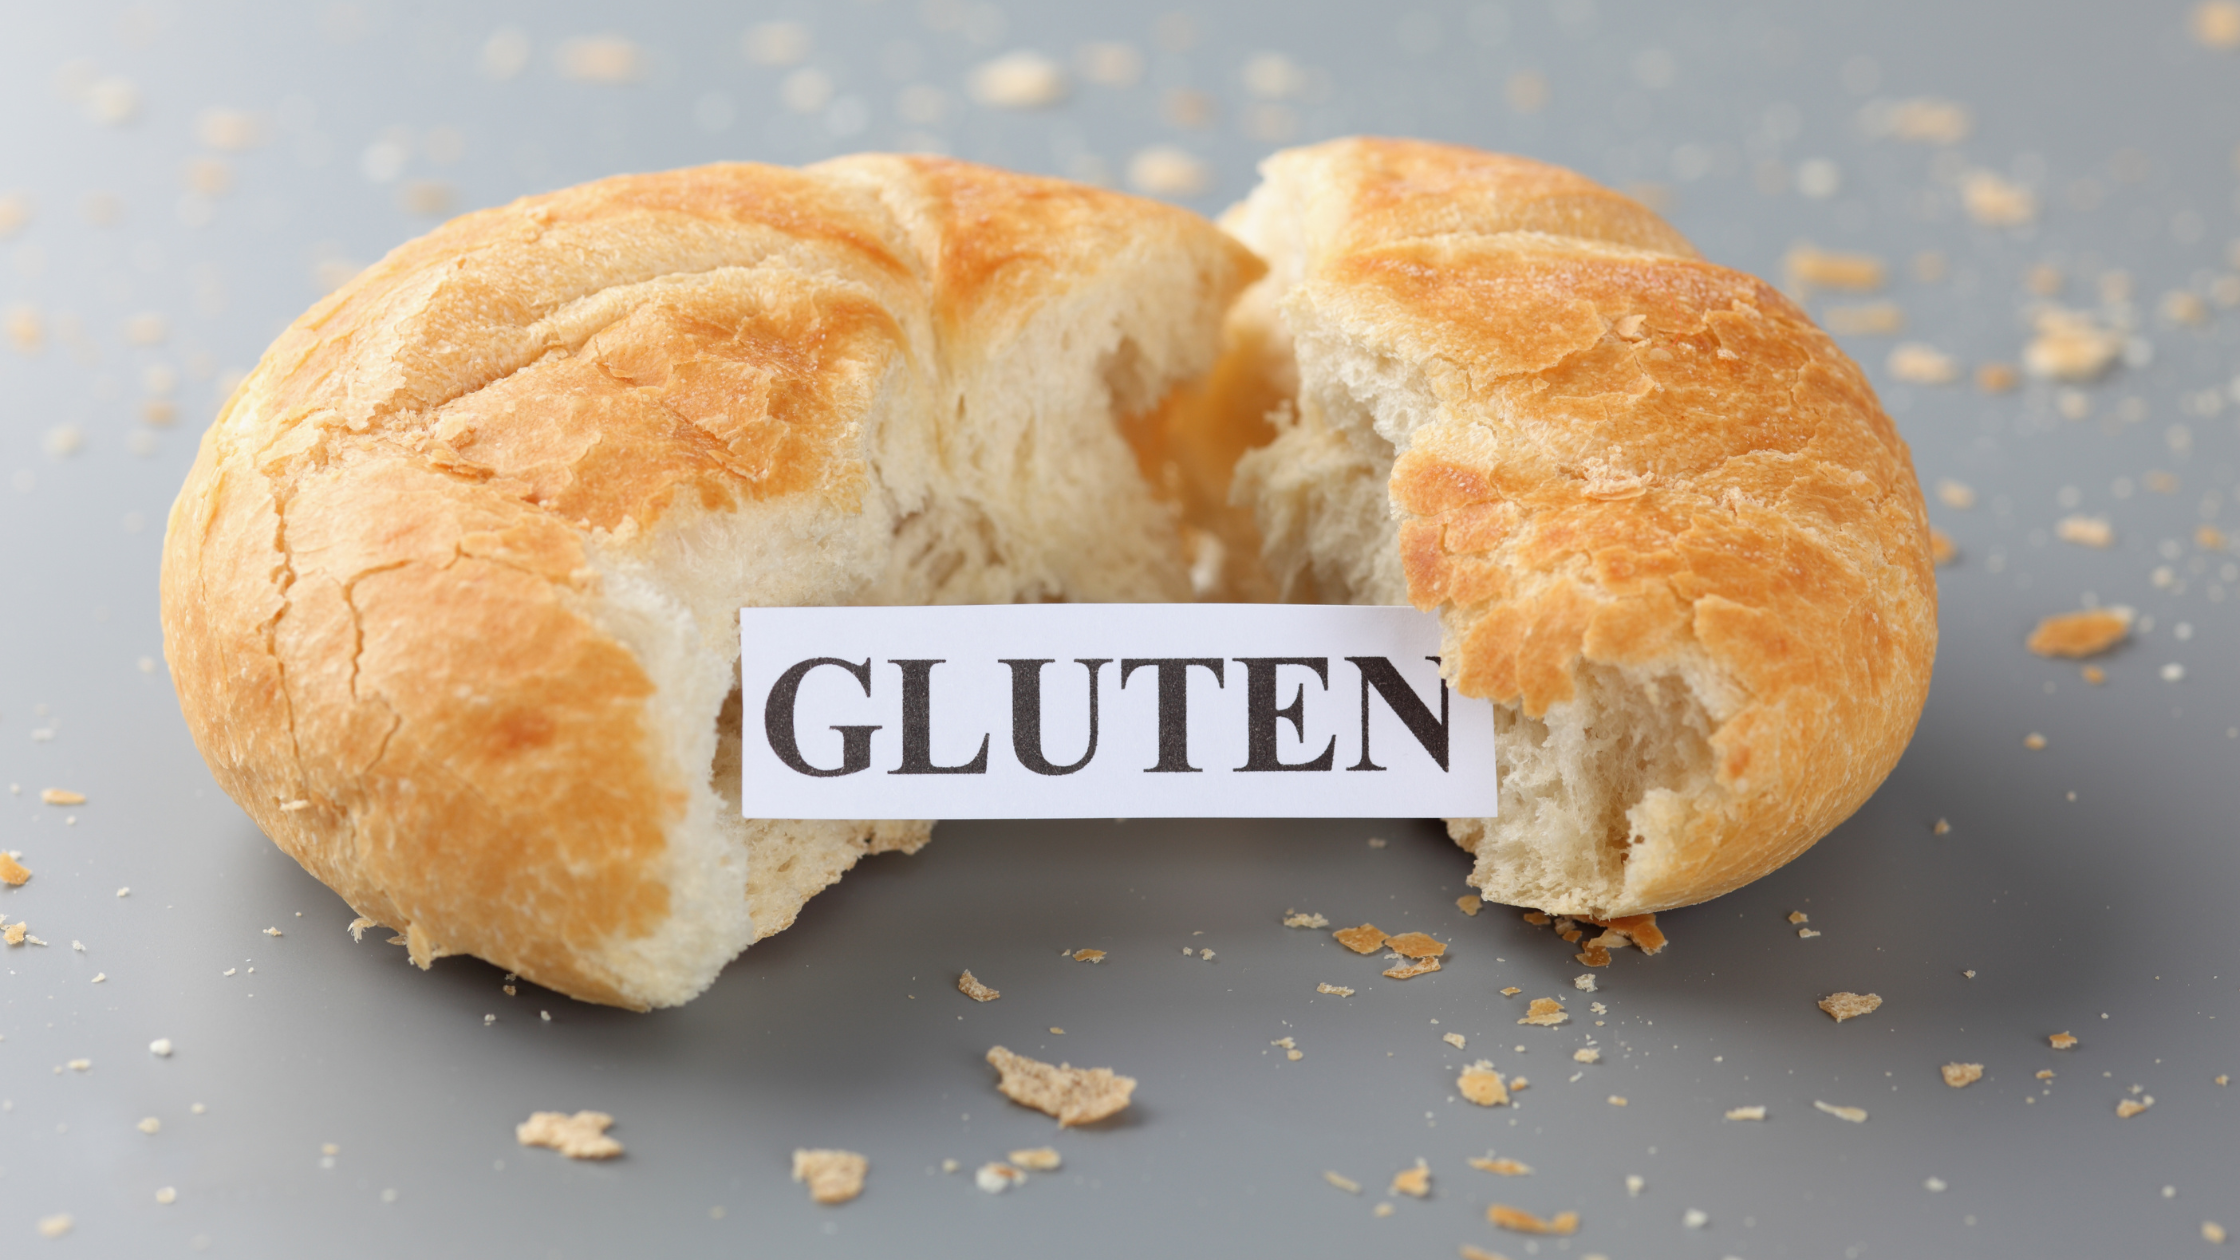 soft bread roll torn in half with a sign that says "gluten"